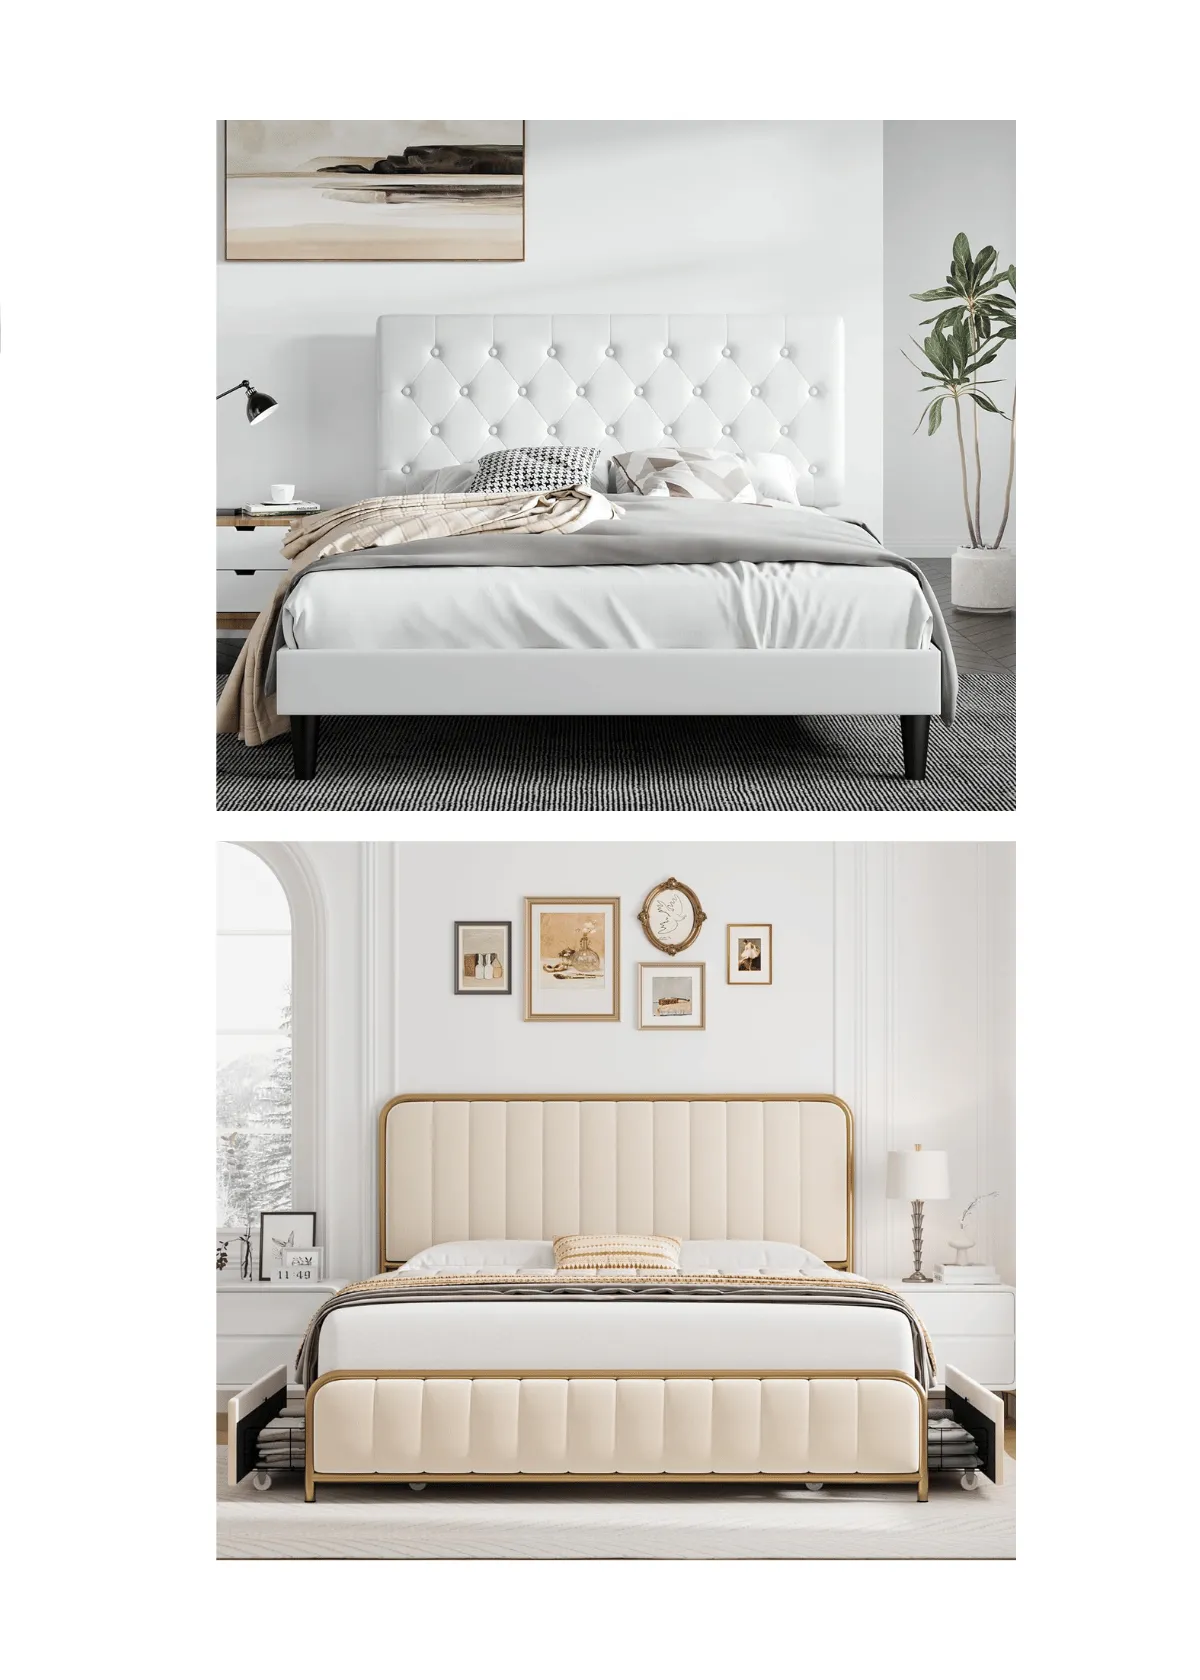 "Cloud Bed Frame | Our Top 15 Picks To Upgrade Your Bedroom"